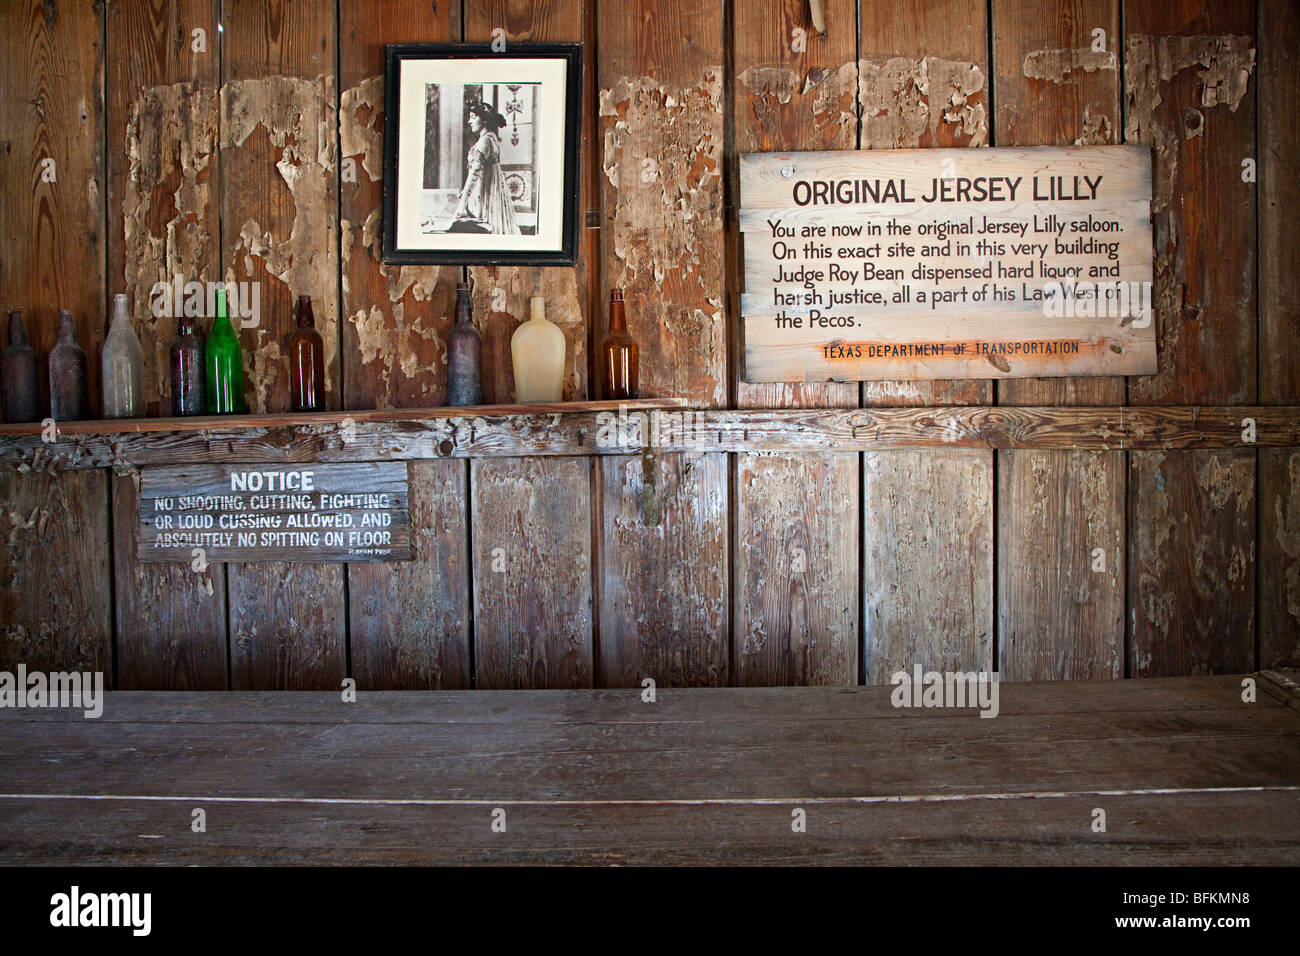 Sign behind the bar of Roy Bean's Jersey Lilly saloon Langtry Texas USA Stock Photo